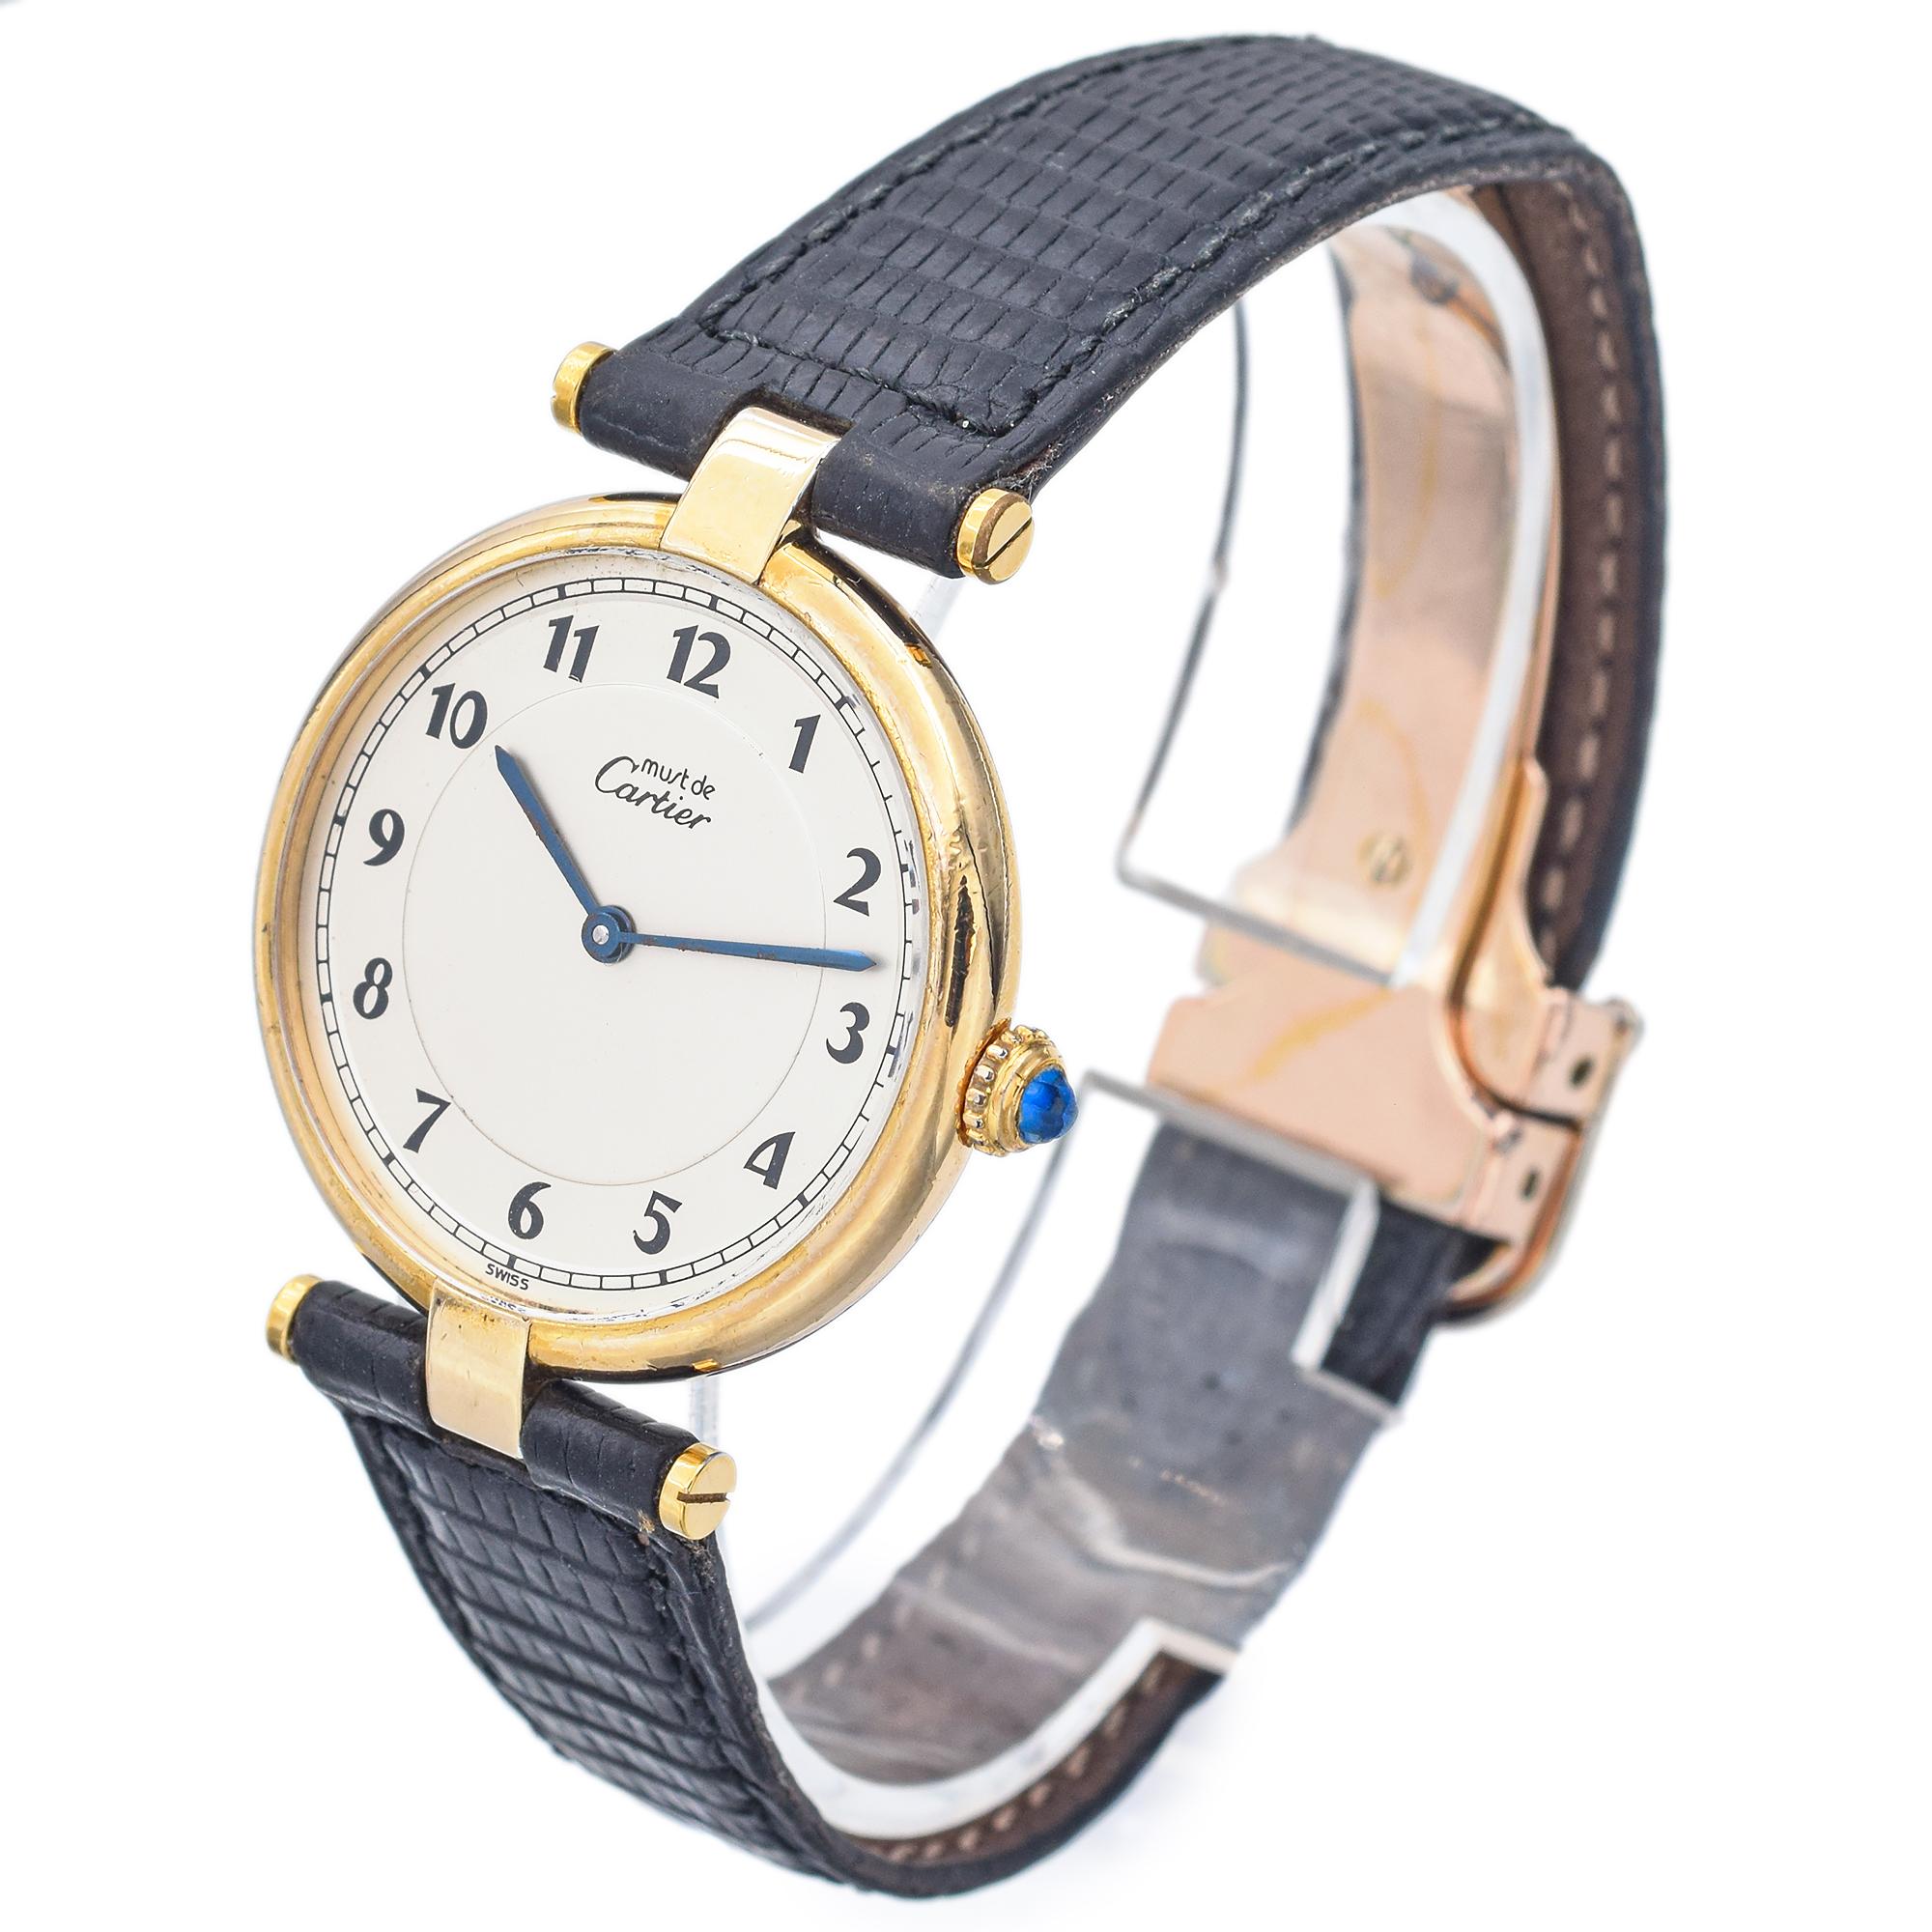 Good condition, fresh battery

Weight: 28.3 grams
Case Size: 30 mm
Reference #: 590003
Band Length: 7 Inches
Hallmark: Cartier

Item #: BR-1068-101023-11